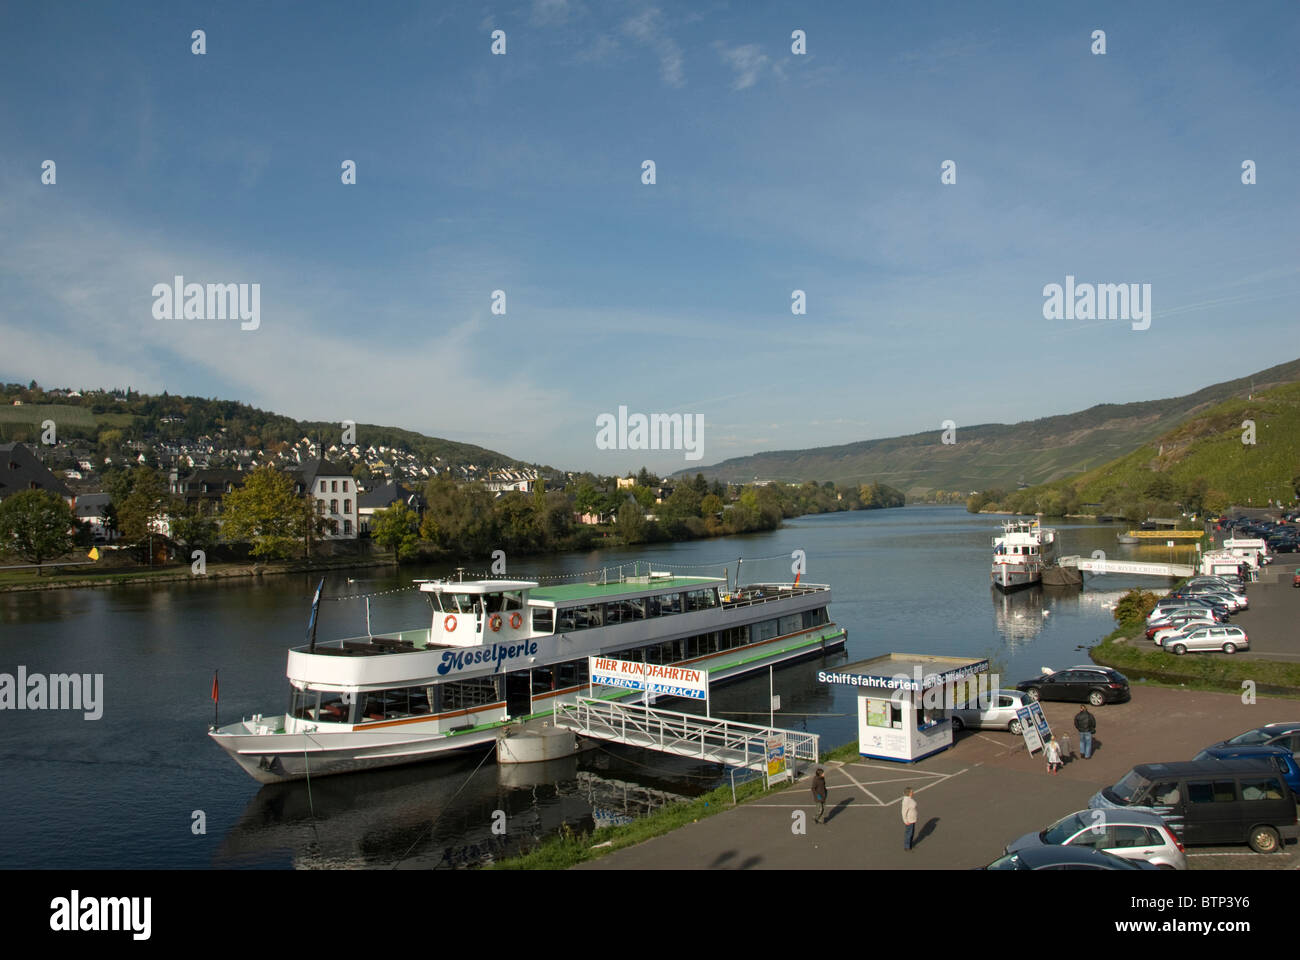 TOURIST BOATS BERTHED AT BERNKASTEL-KUES ON RIVER MOSEL WITH TOURISTS VISITING VINEYARDS Stock Photo